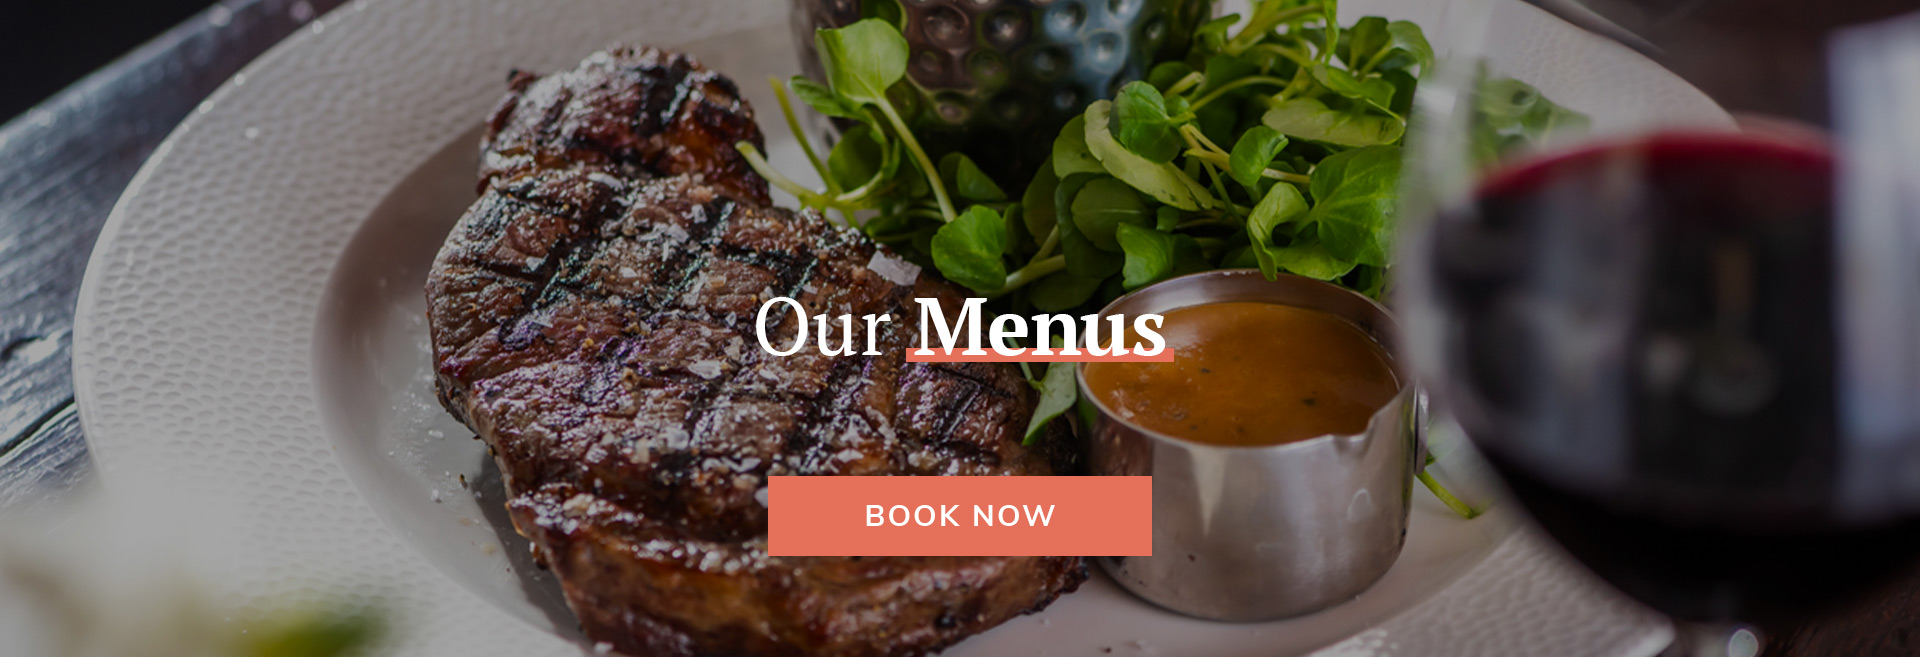 Book Now at The Drummond